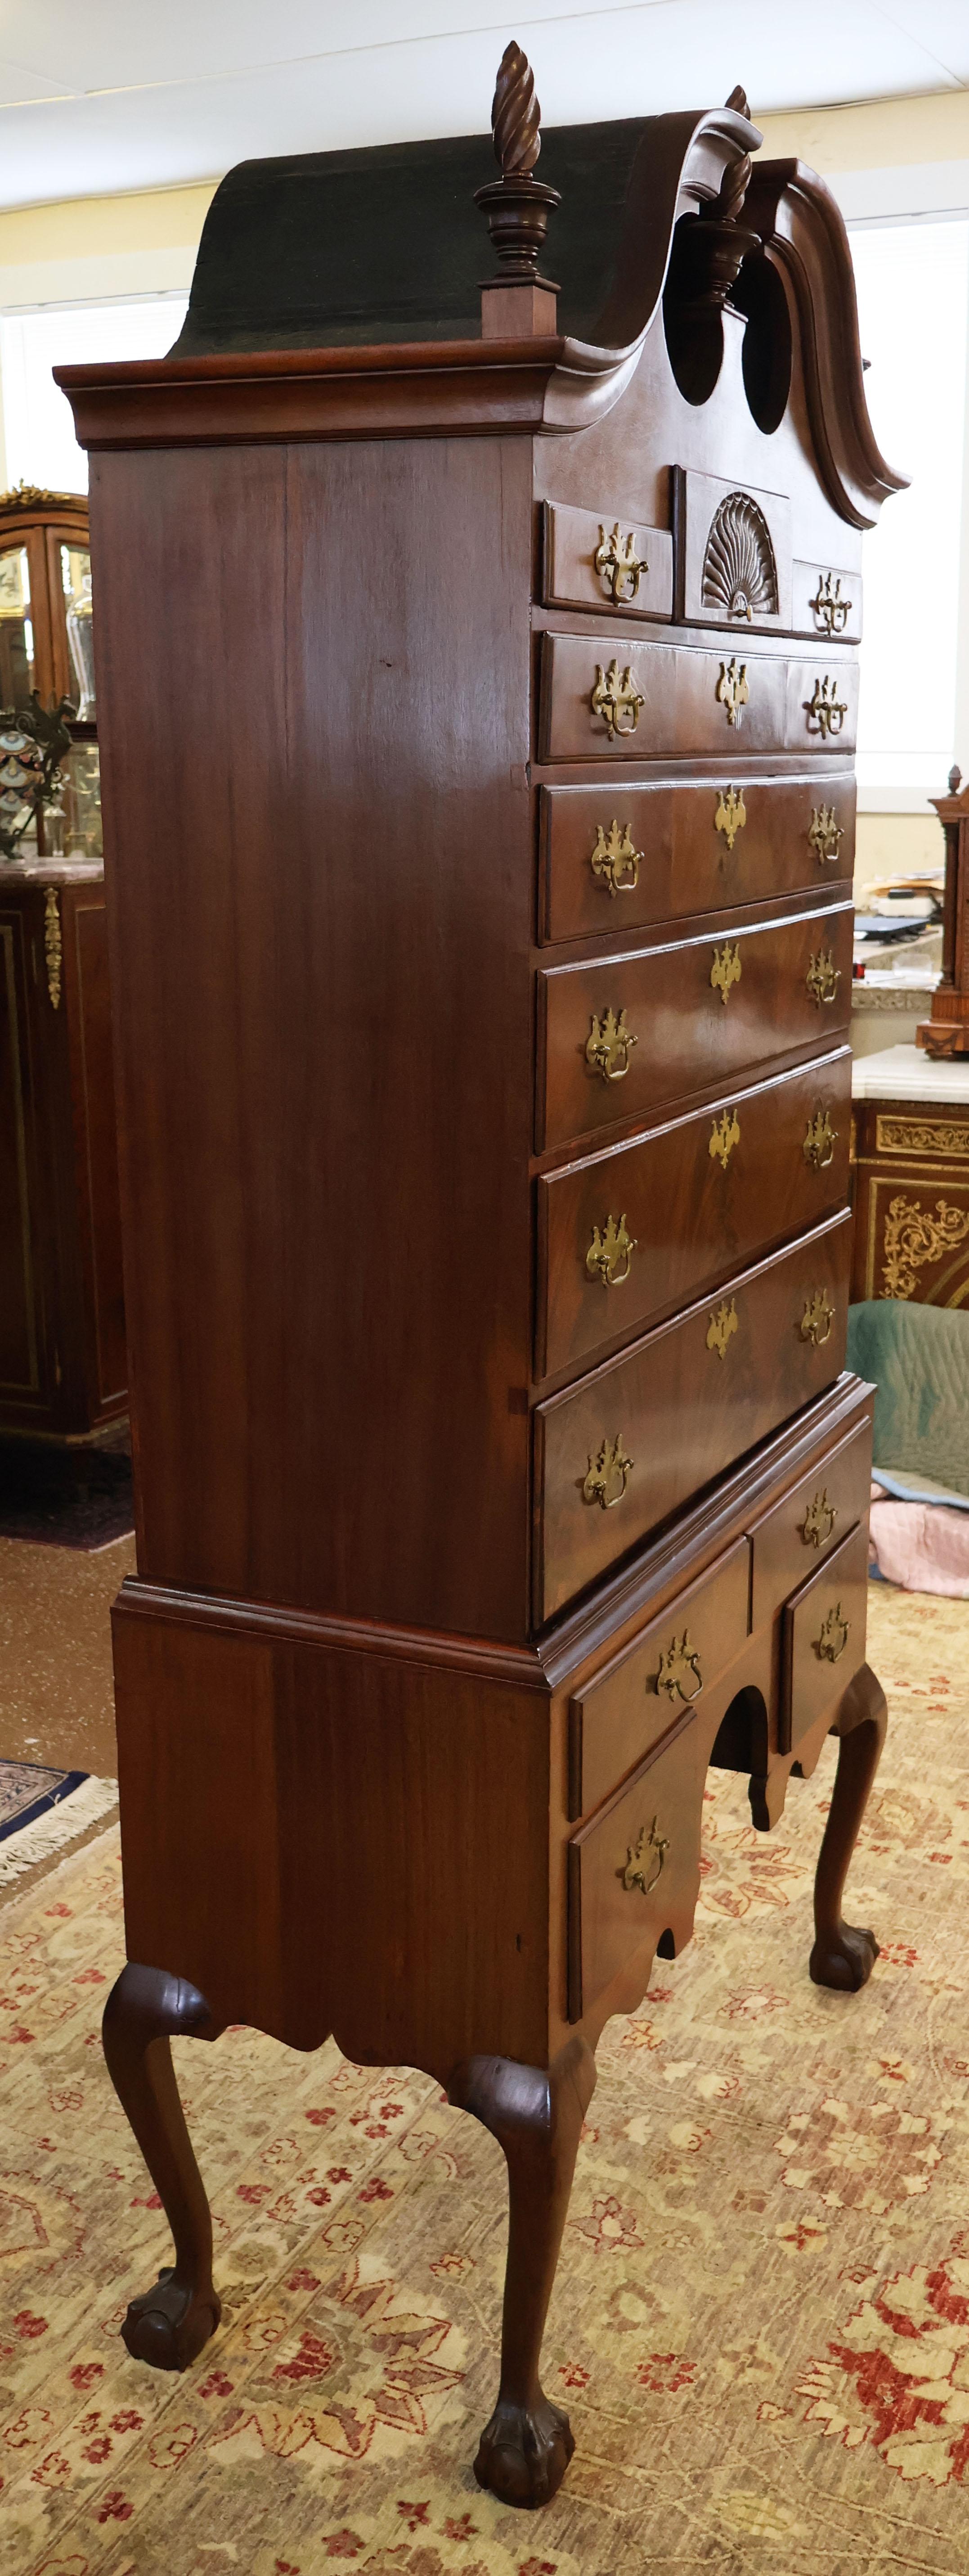 19th Century American Mahogany Chippendale Bonnet Top High Chest Highboy For Sale 2